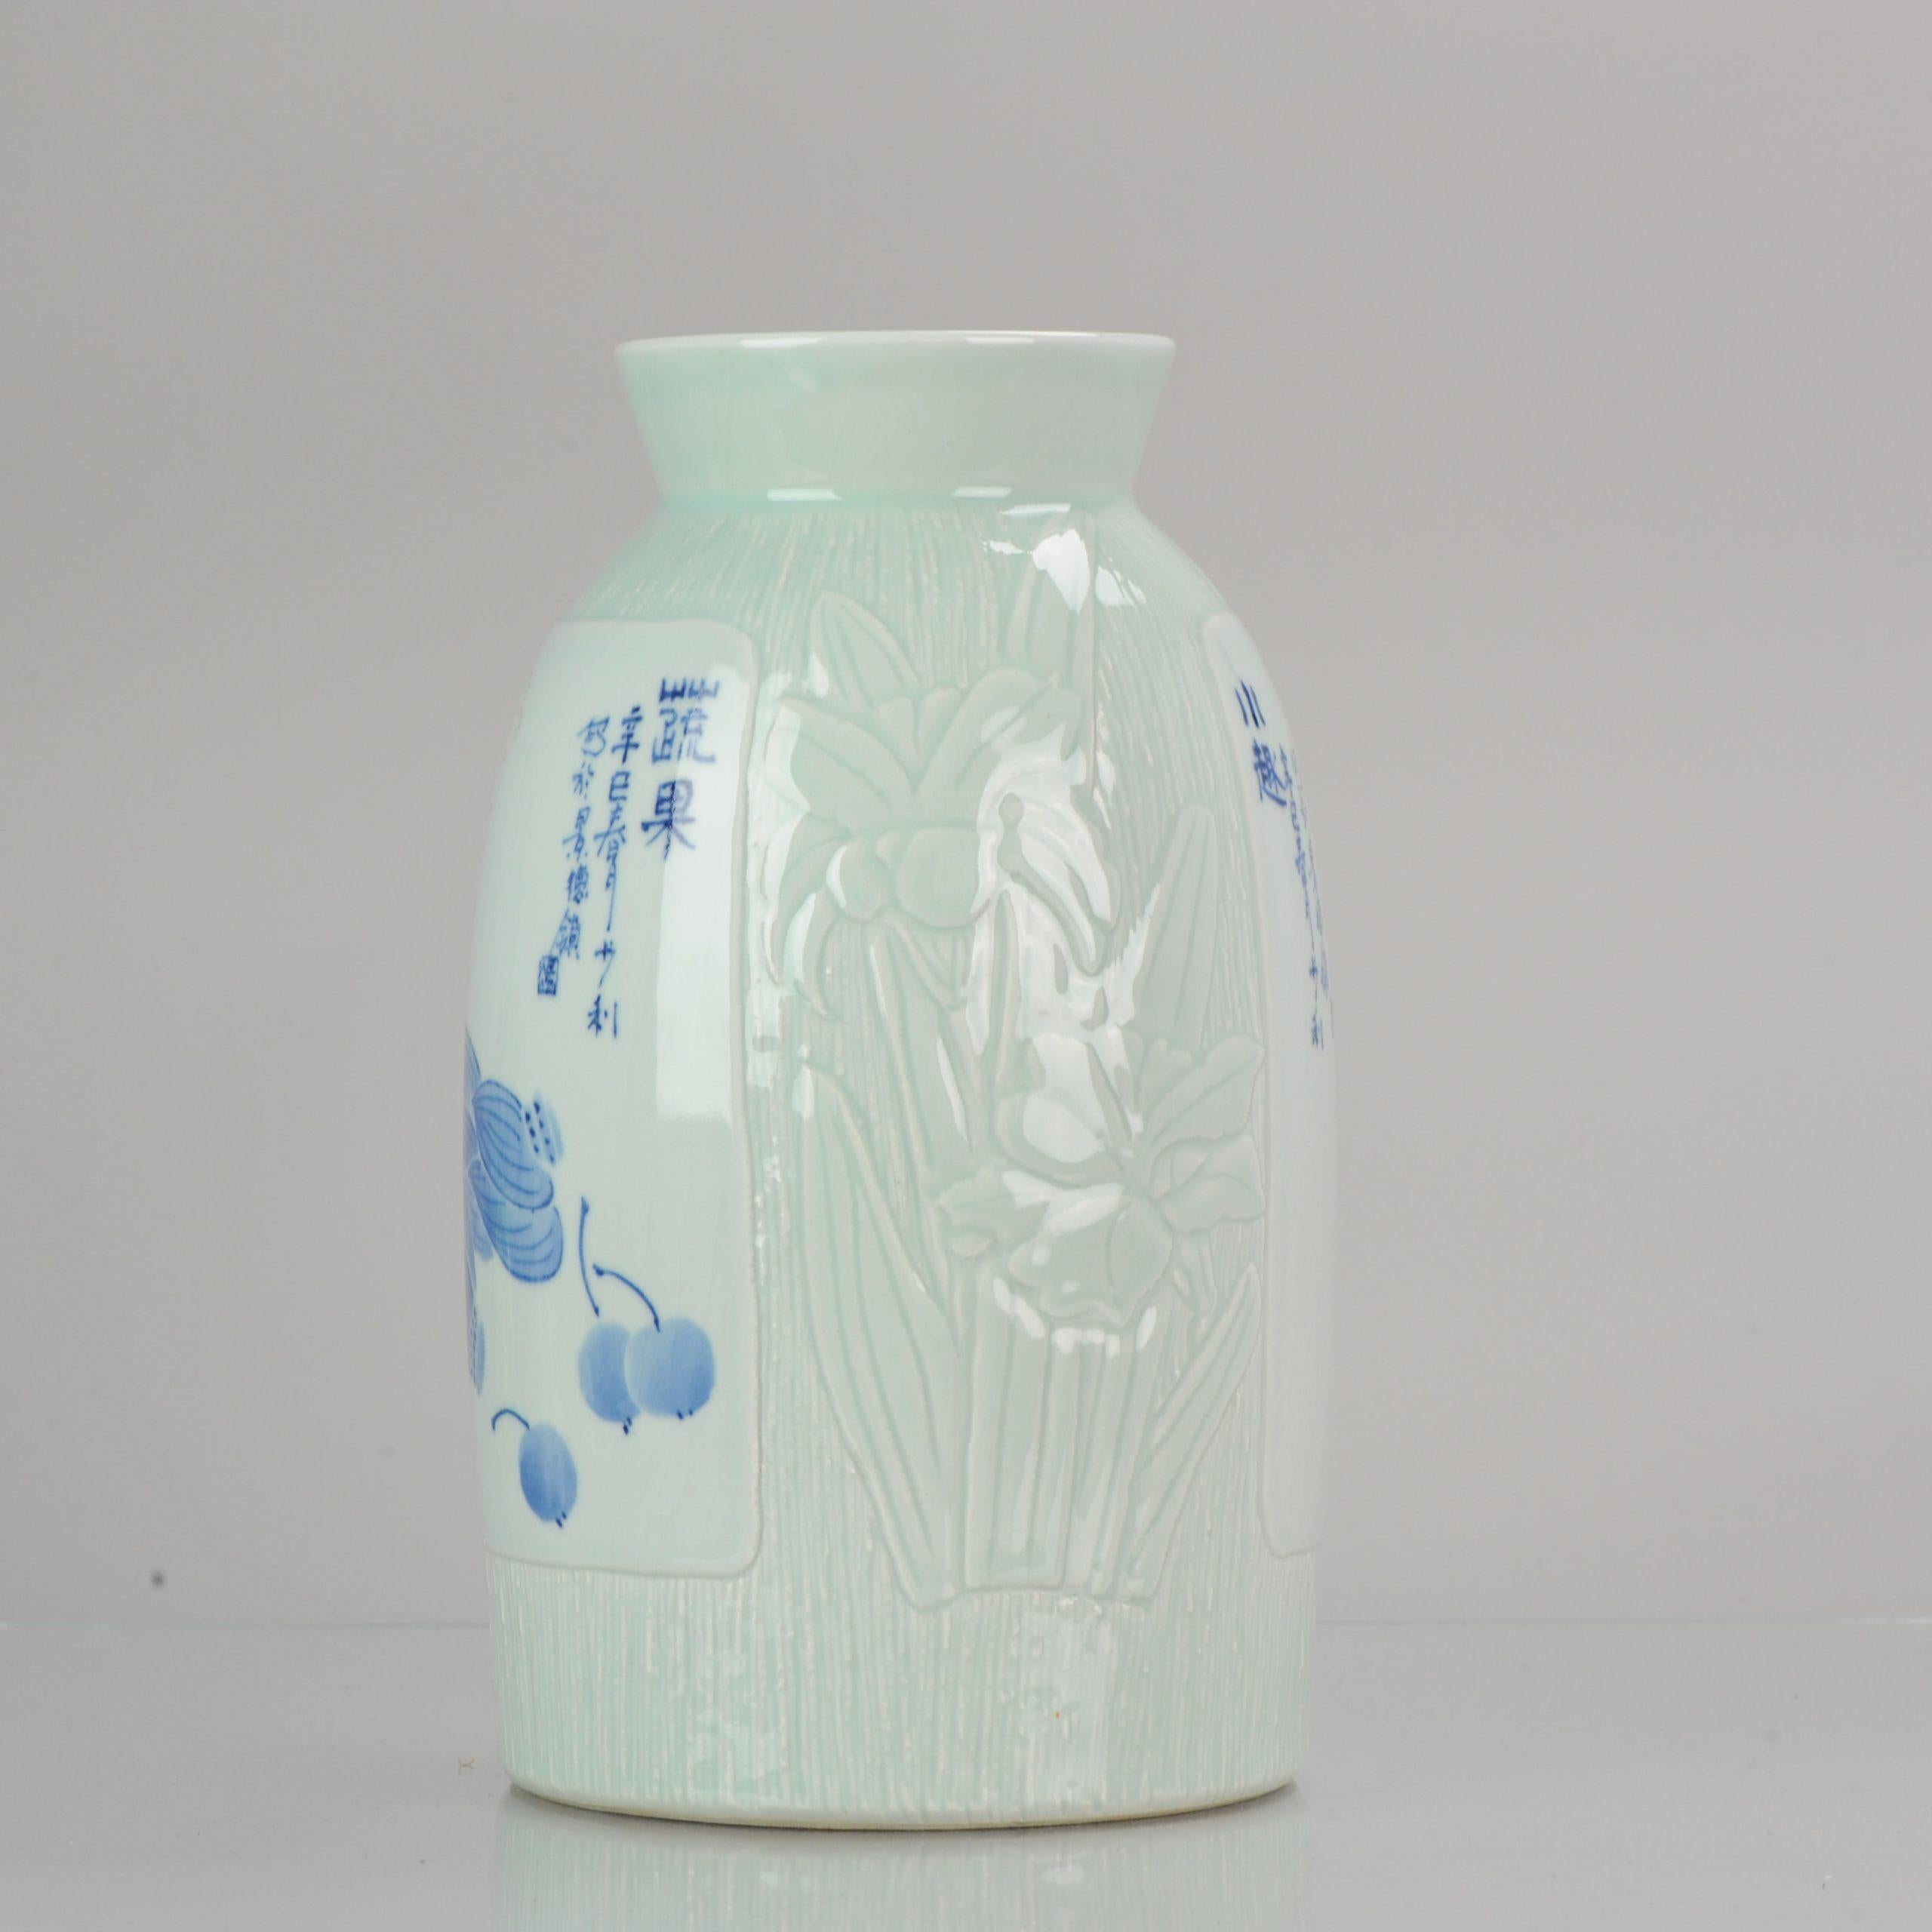 Wanglin '1972' Artist Marked Celadon Anhua Vase Dated 2001 Chinese Porcelain For Sale 3